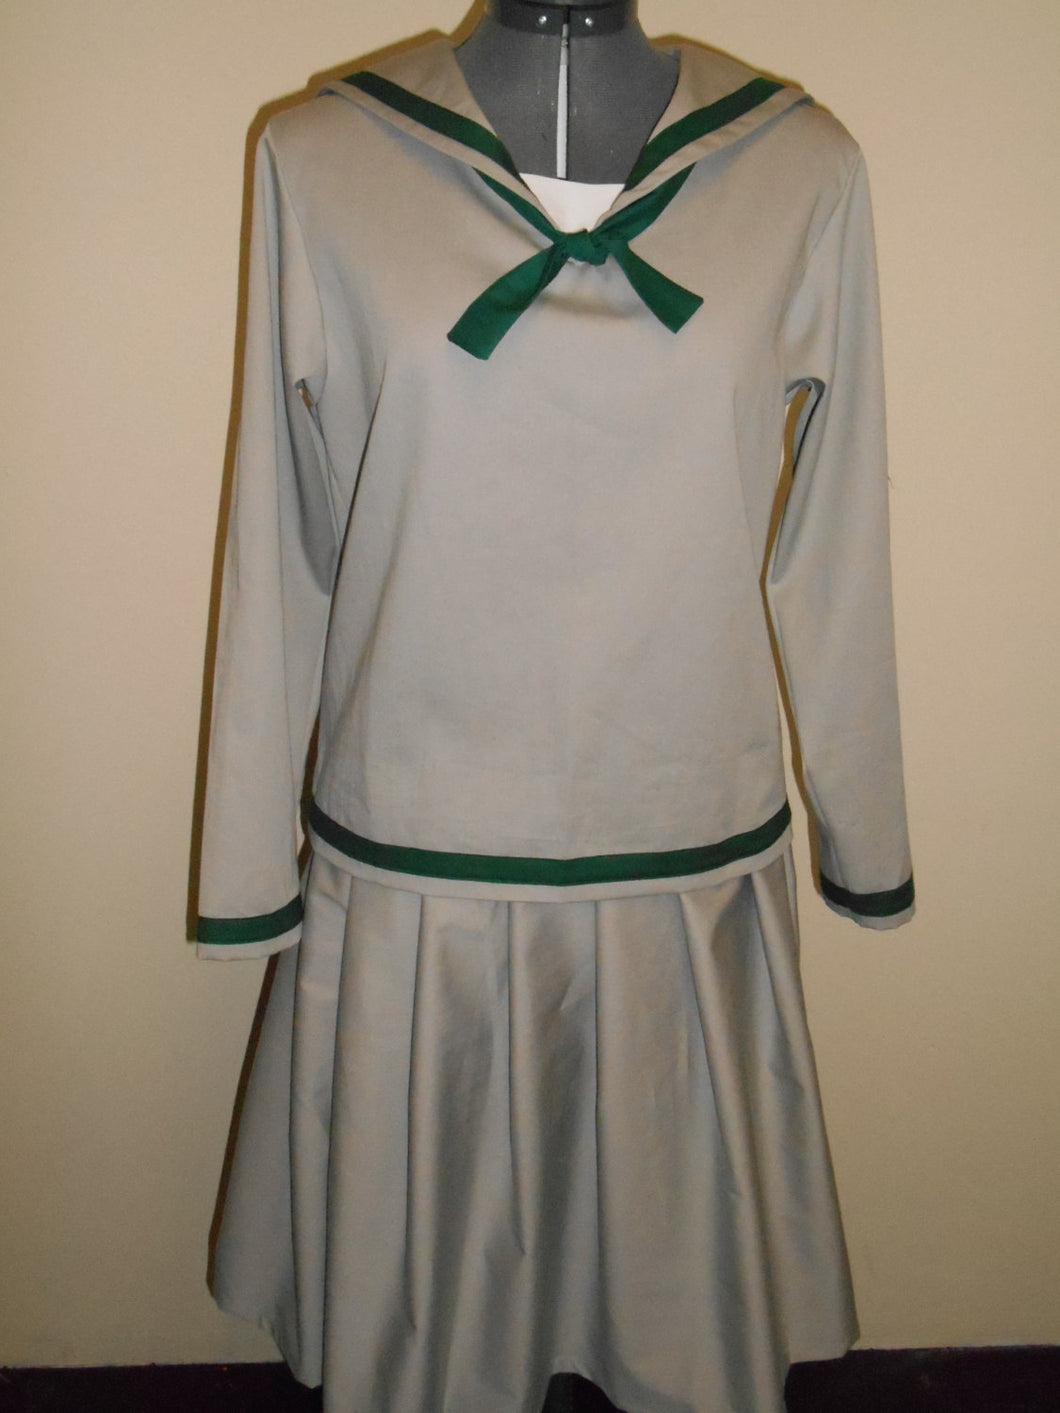 Uniforms For the VonTrapp Children from the Sound of Music